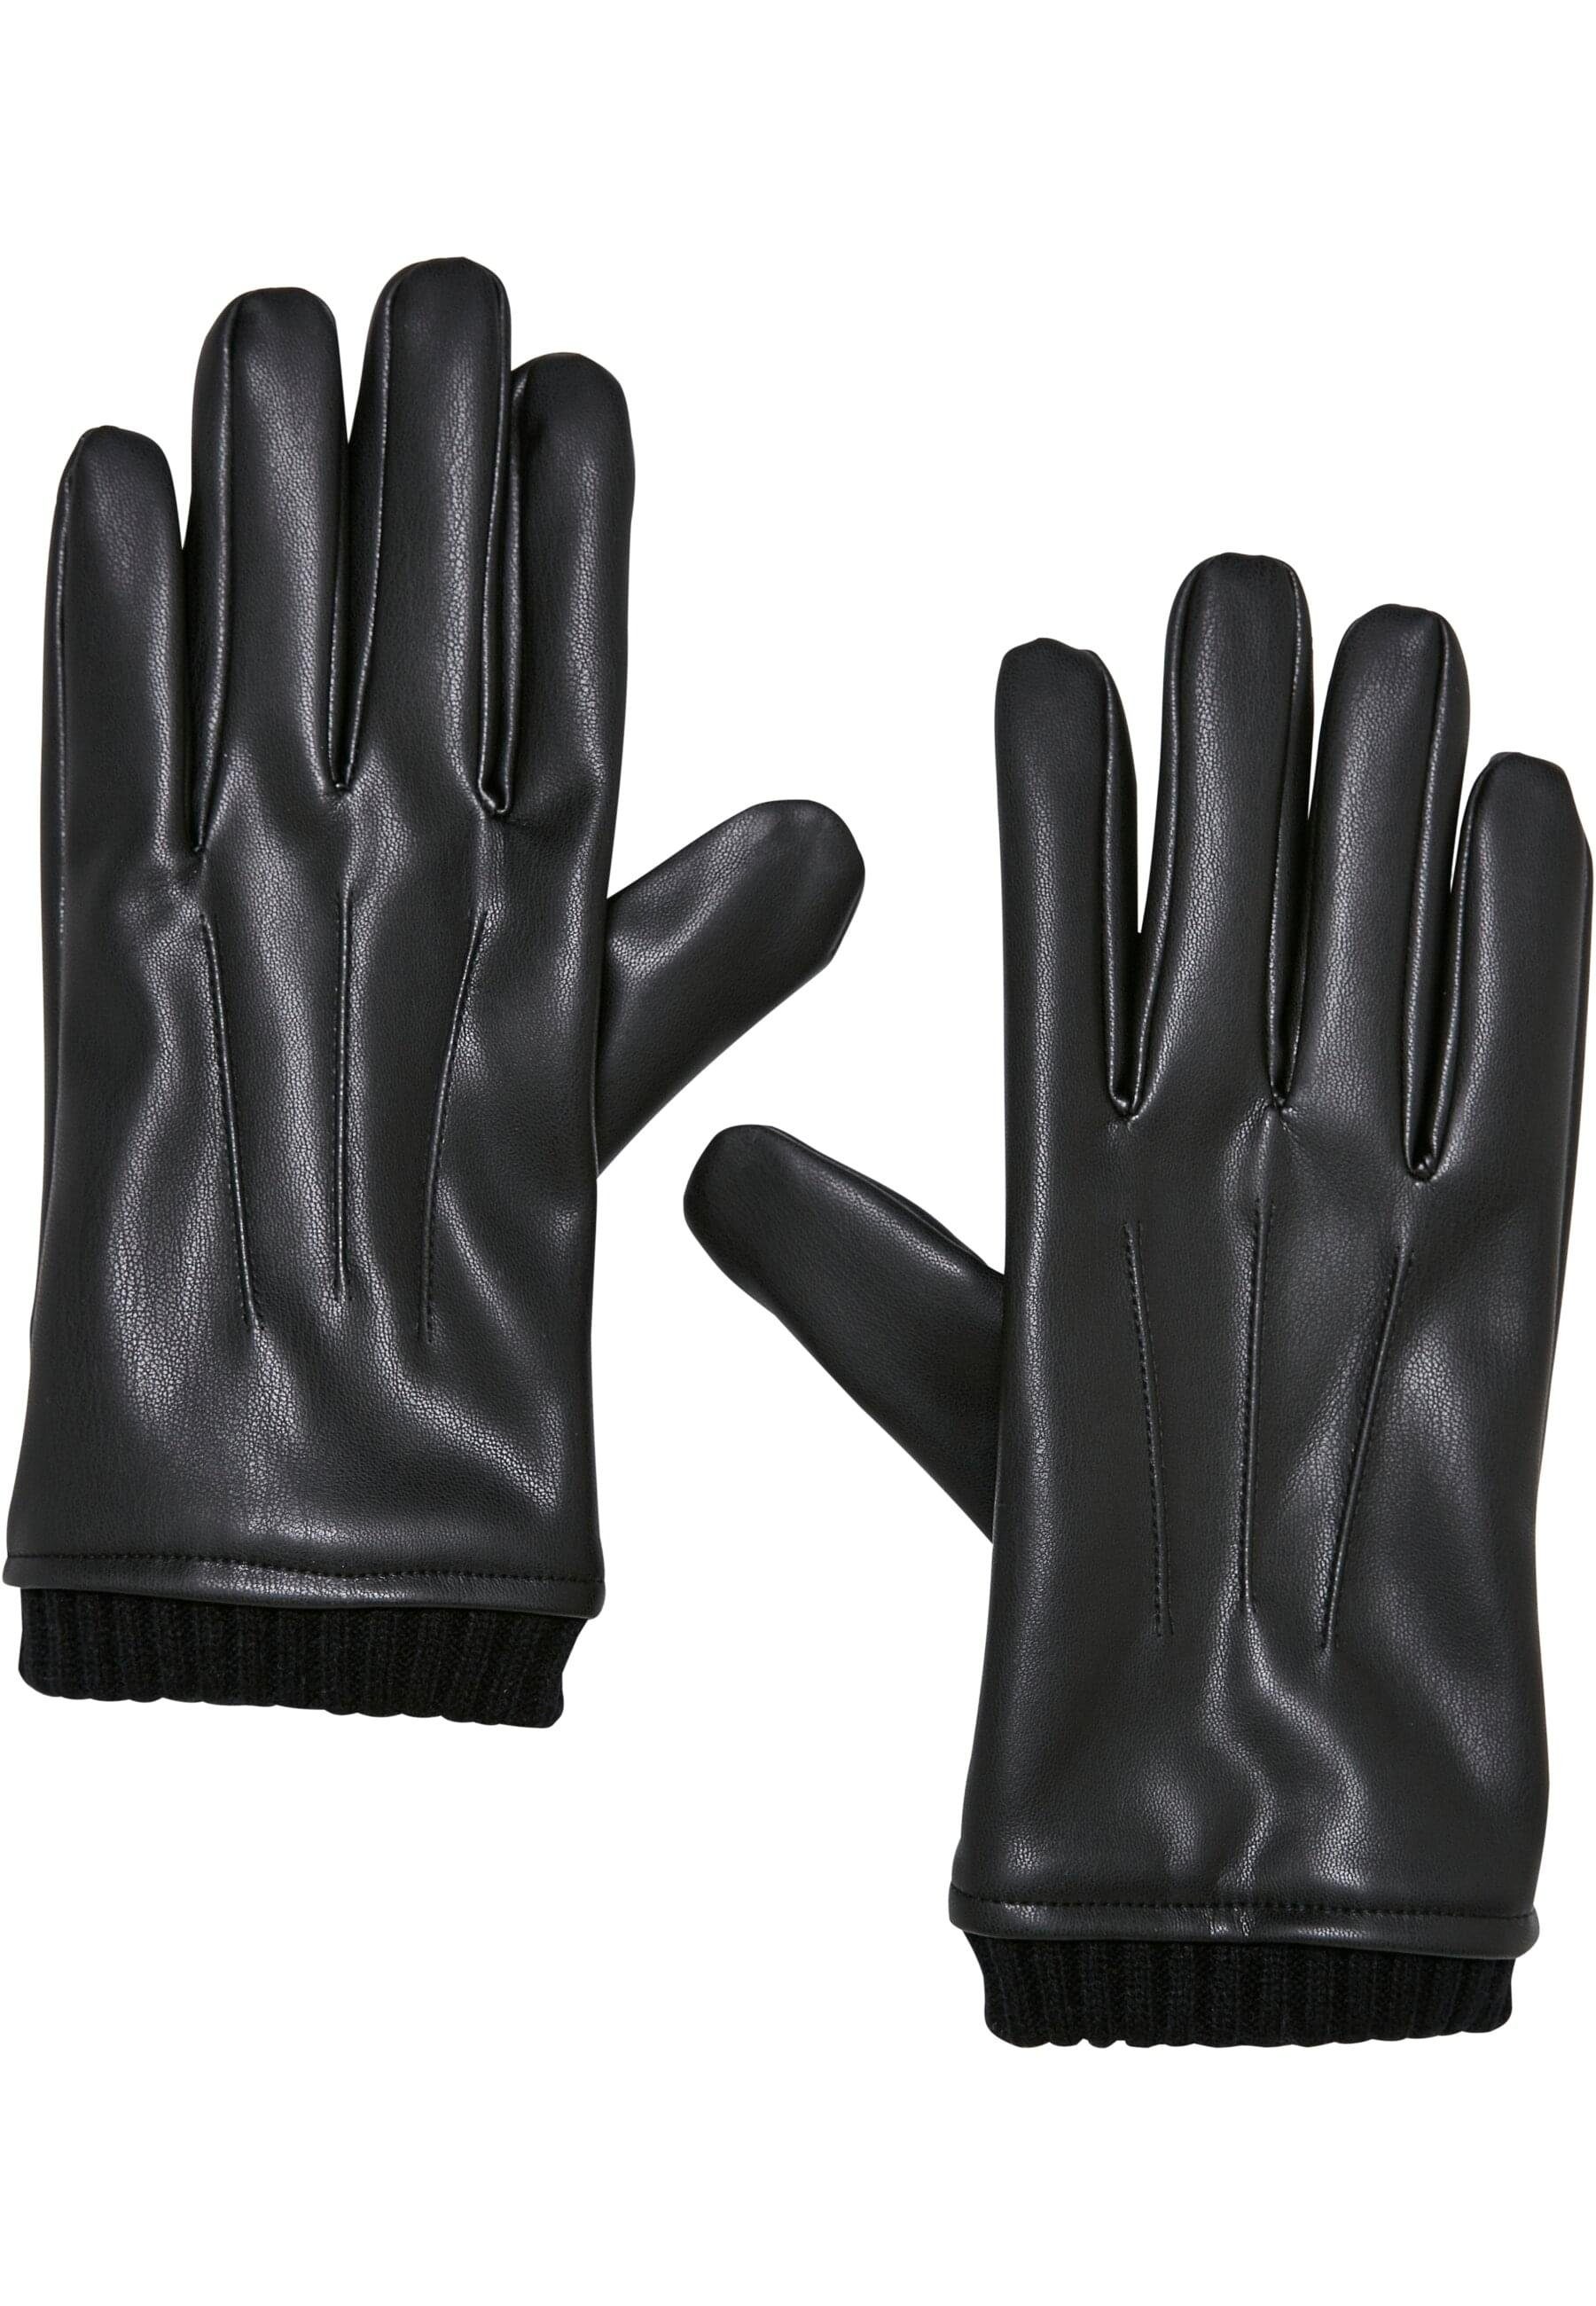 CLASSICS Leather URBAN Gloves Basic Baumwollhandschuhe Unisex Synthetic